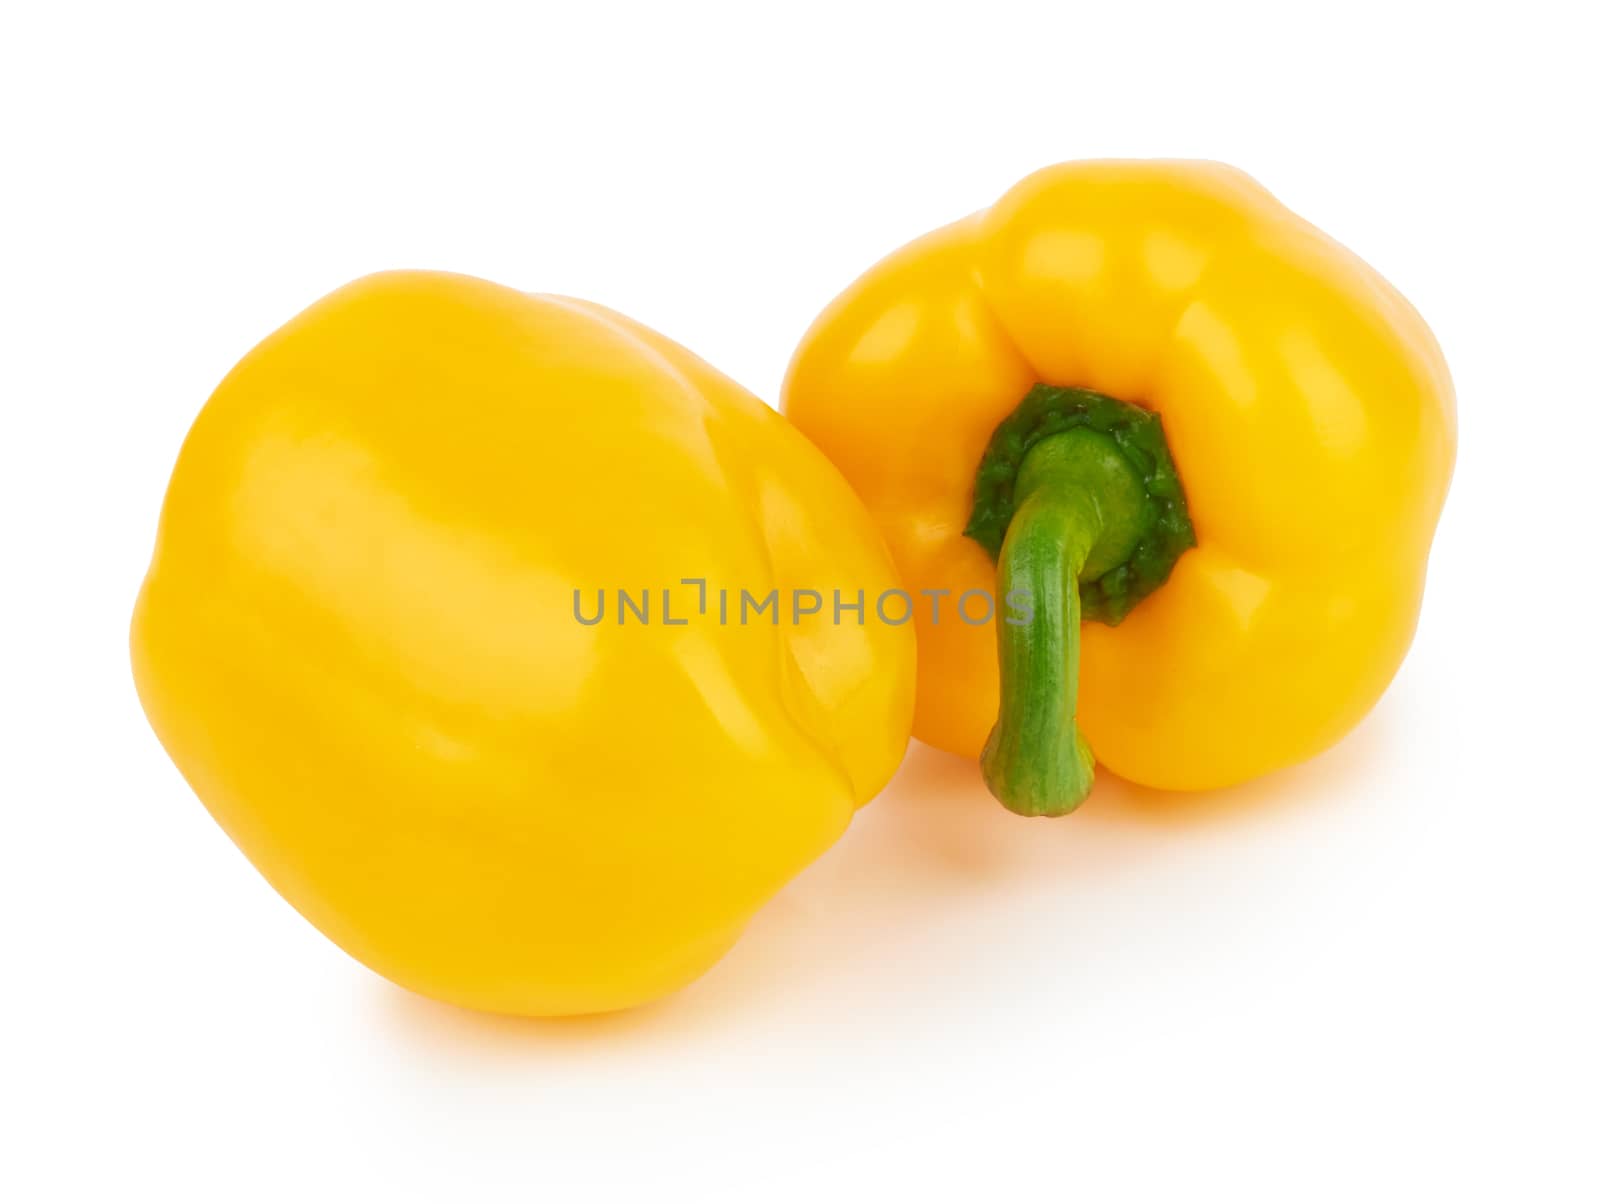 Two sweet peppers isolated on white background